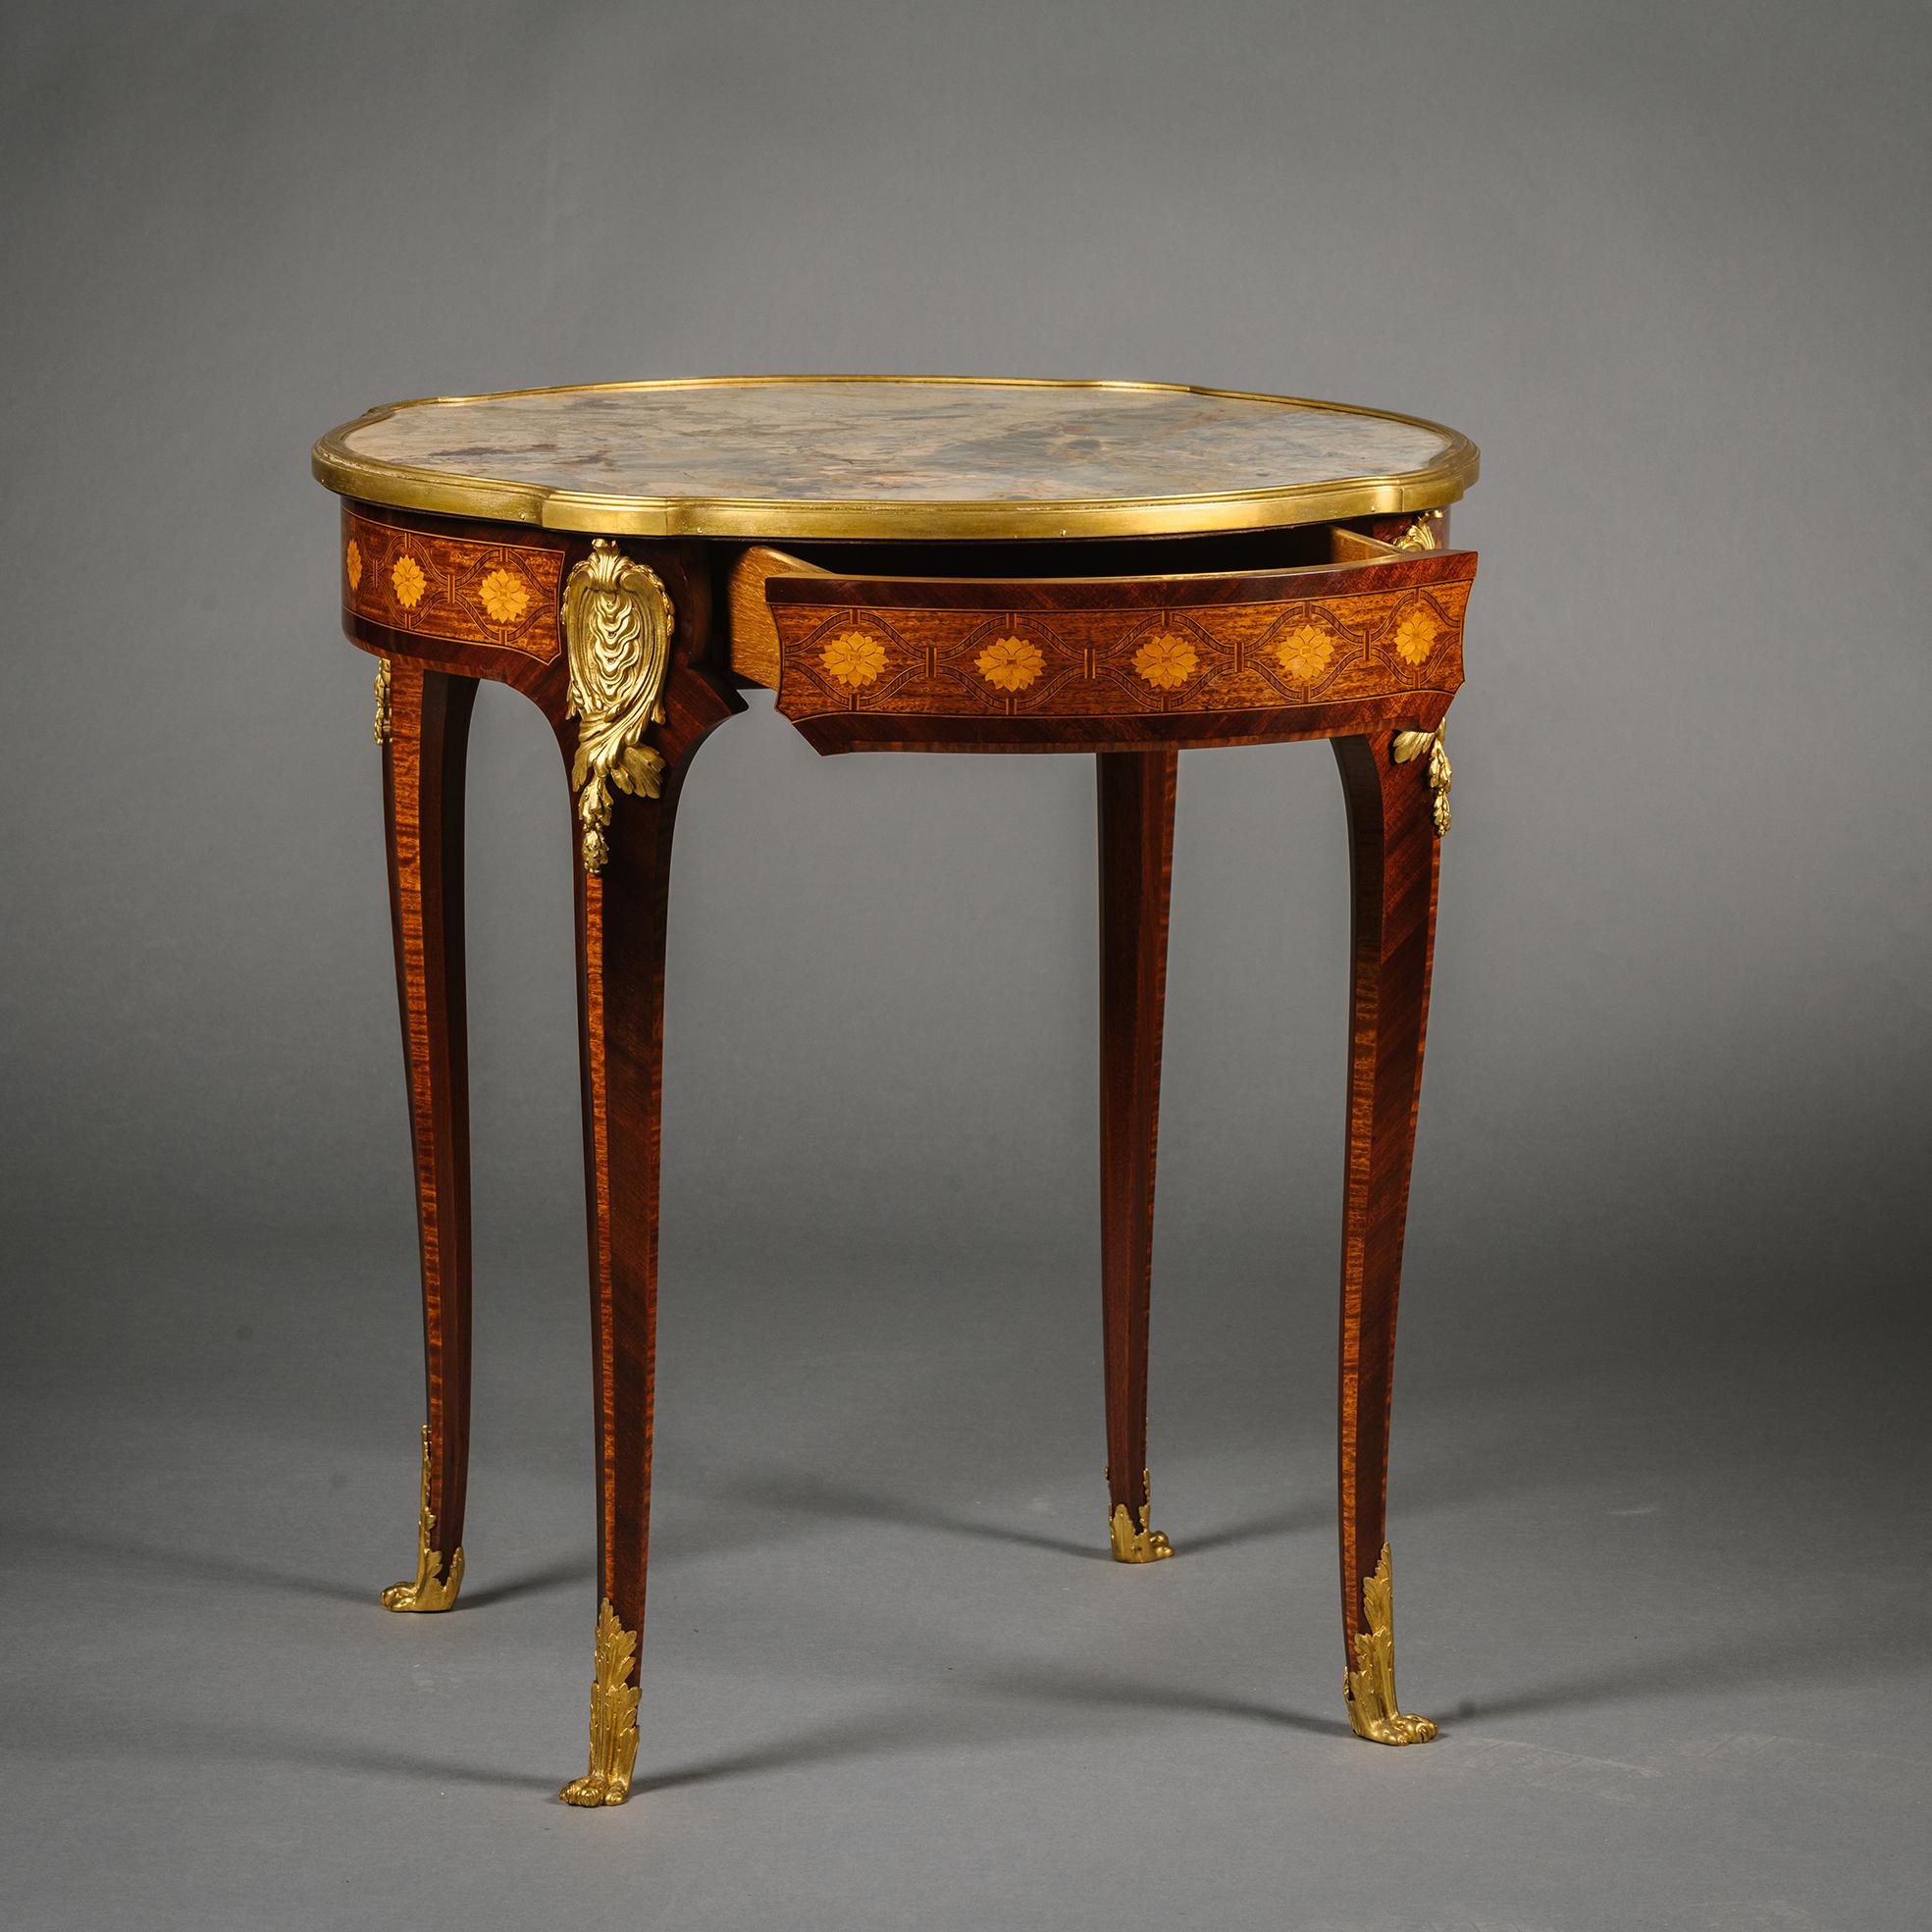 A Louis XV Style Gilt-Bronze Mounted Mahogany and Parquetry Occasional Table.

The Sarrancolin marble top within a gilt-bronze surround. The frieze is decorated with superb parquetry of sunflower-filled interlaced trellis in different precious